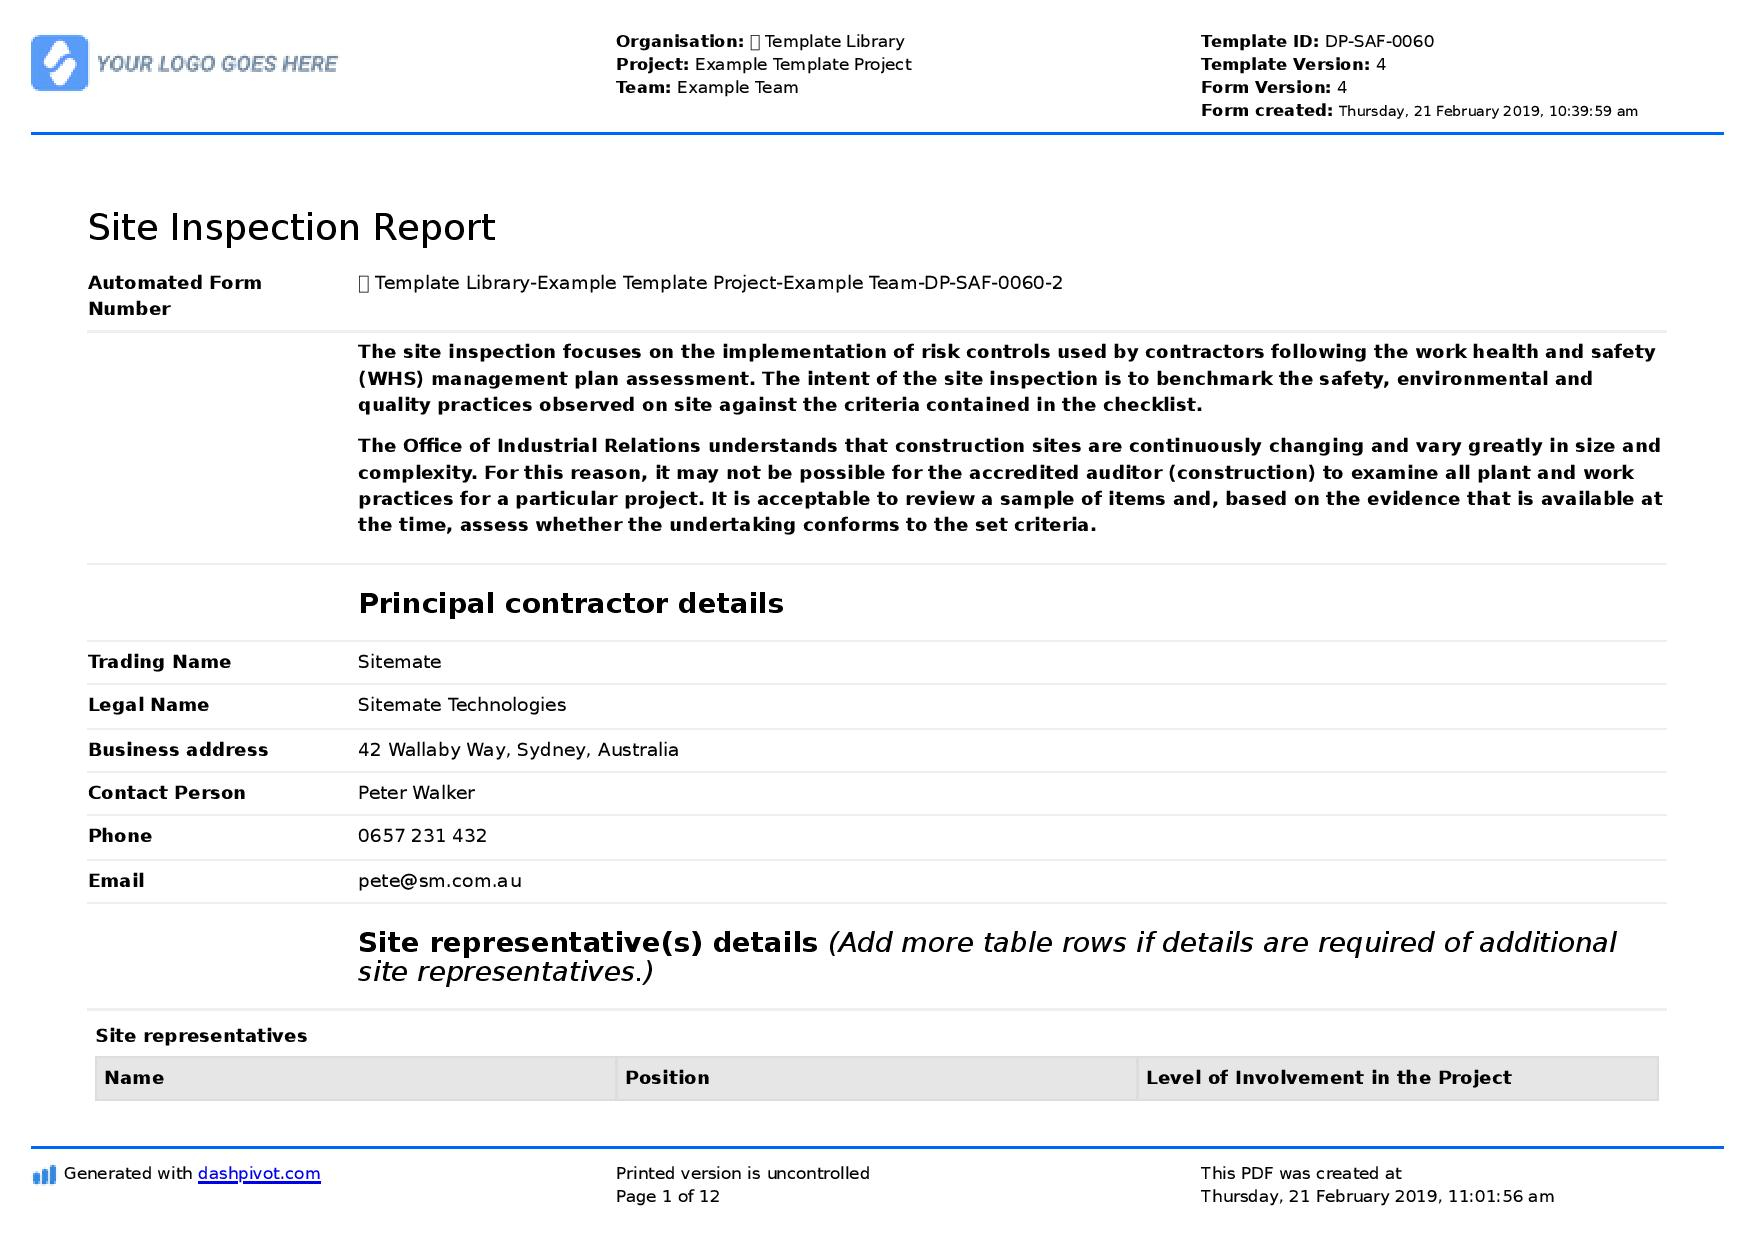 Site Inspection Report: Free template, sample and a proven format Pertaining To Site Visit Report Template